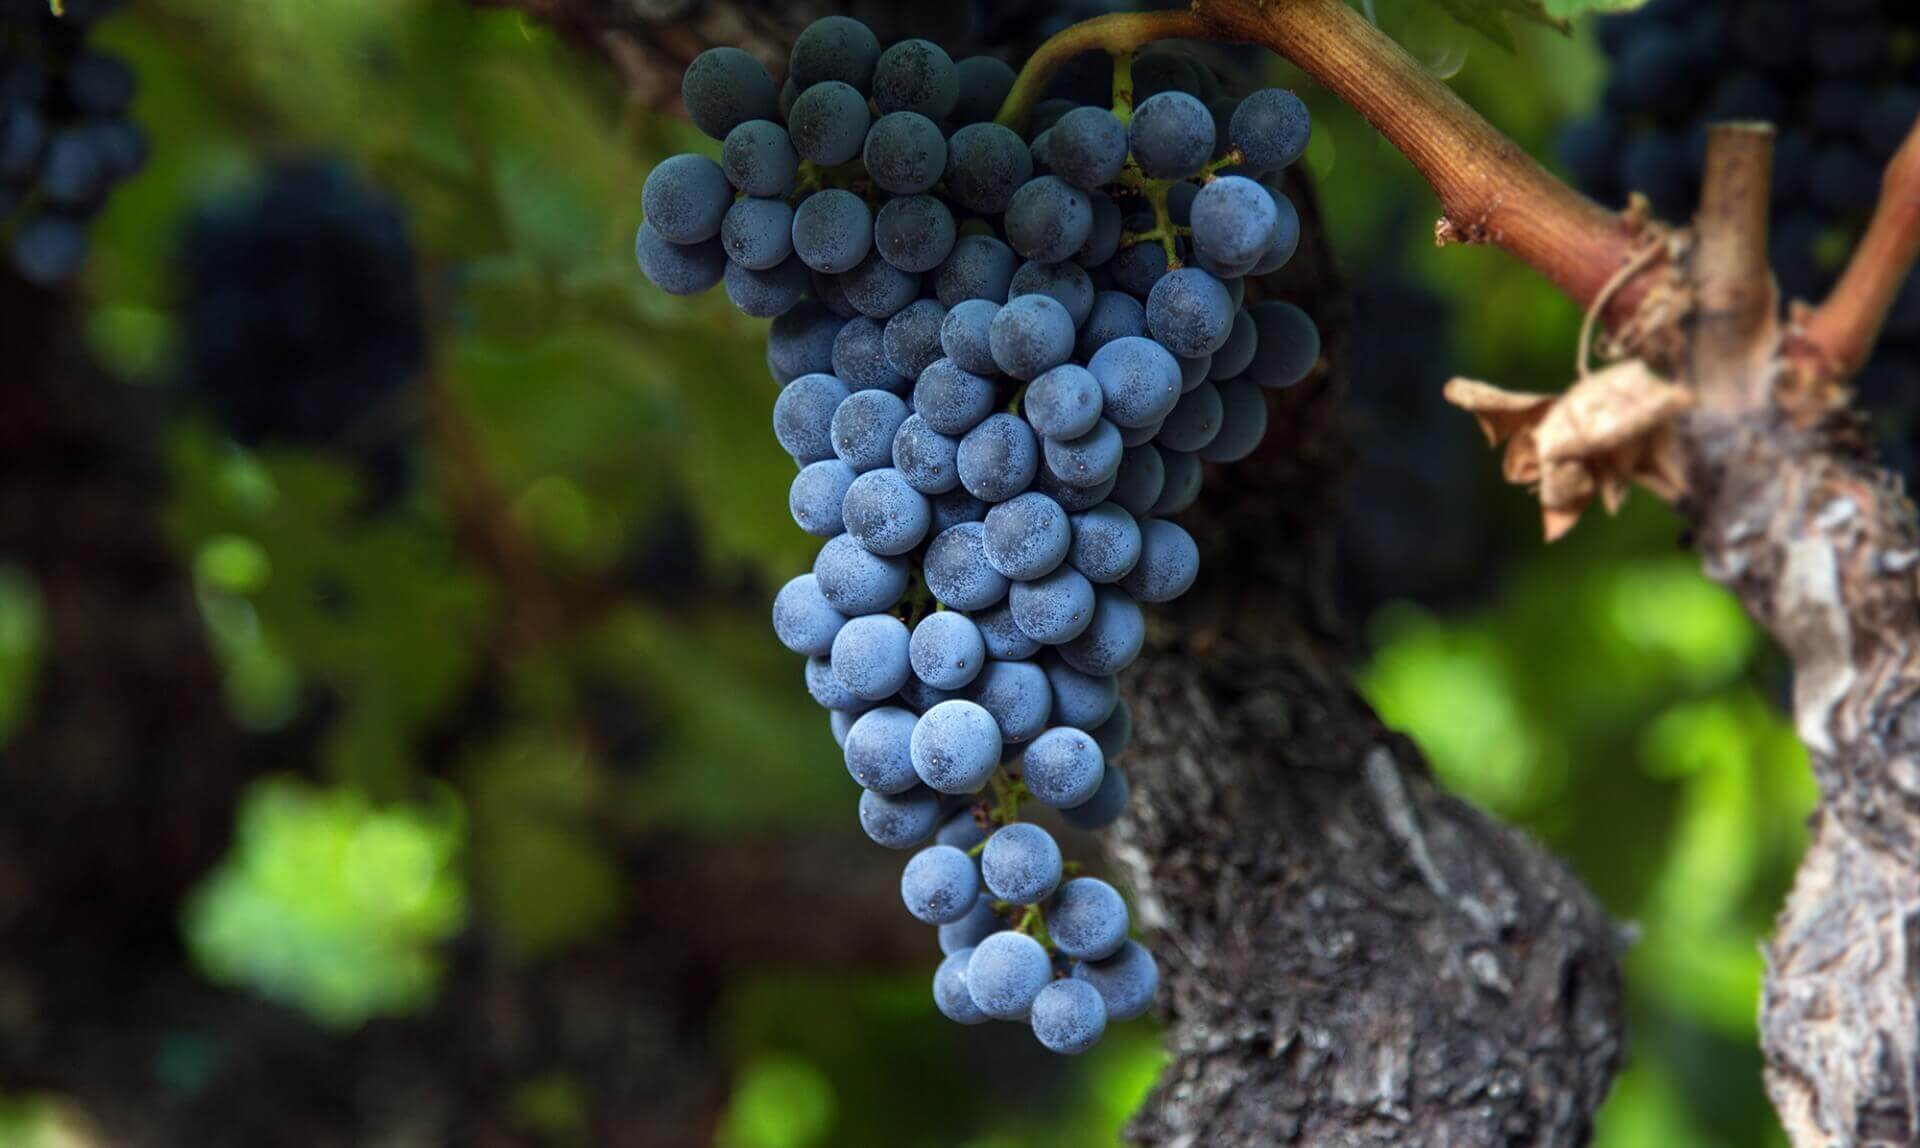 Up Close Shot of Plump Grapes Hanging from Tree